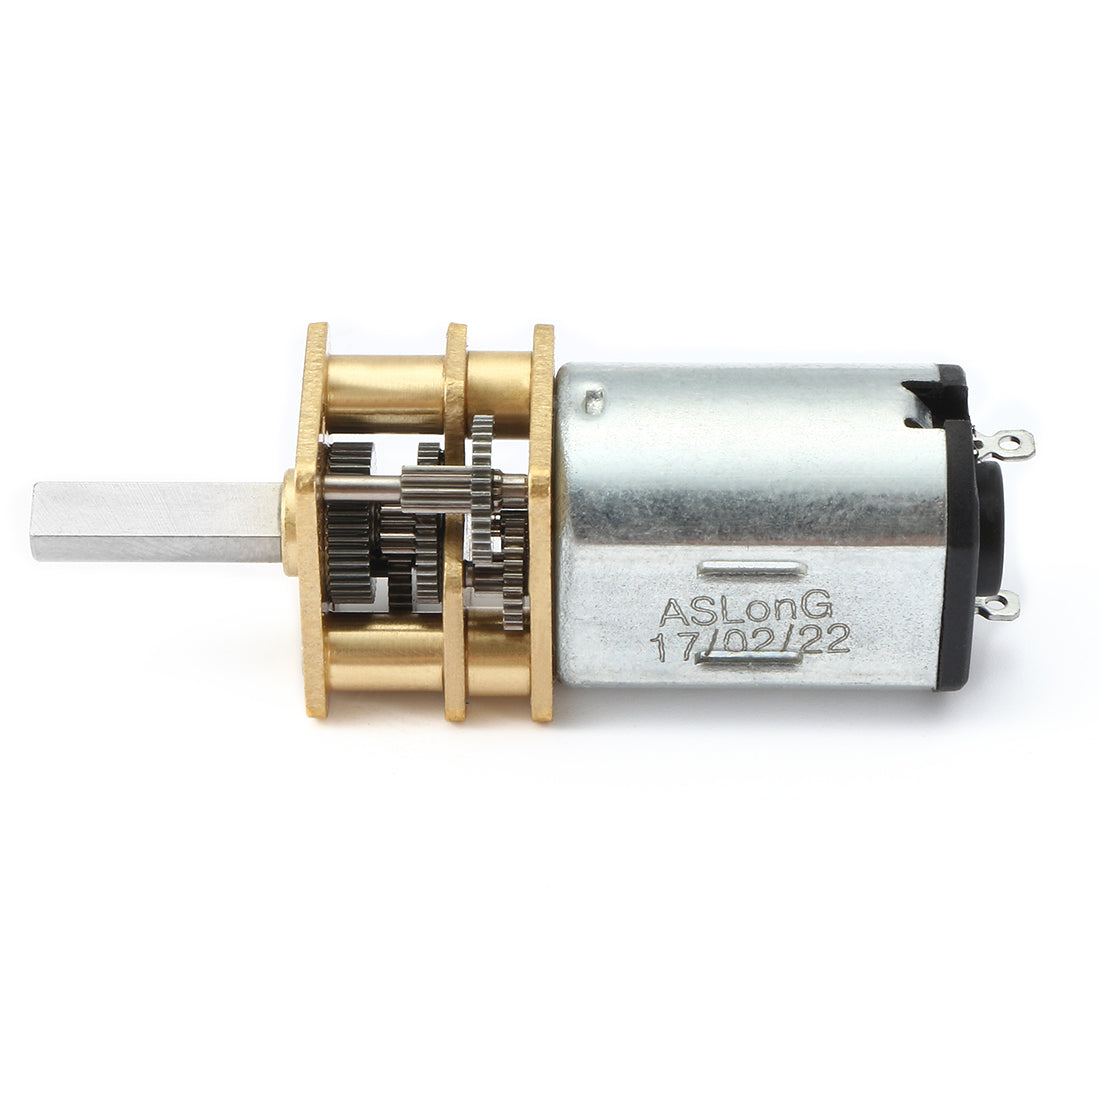 Uxcell Uxcell DC3V 19RPM Micro Gear Box Speed Reduction Motor Electric Geared Motor with 2 Terminals